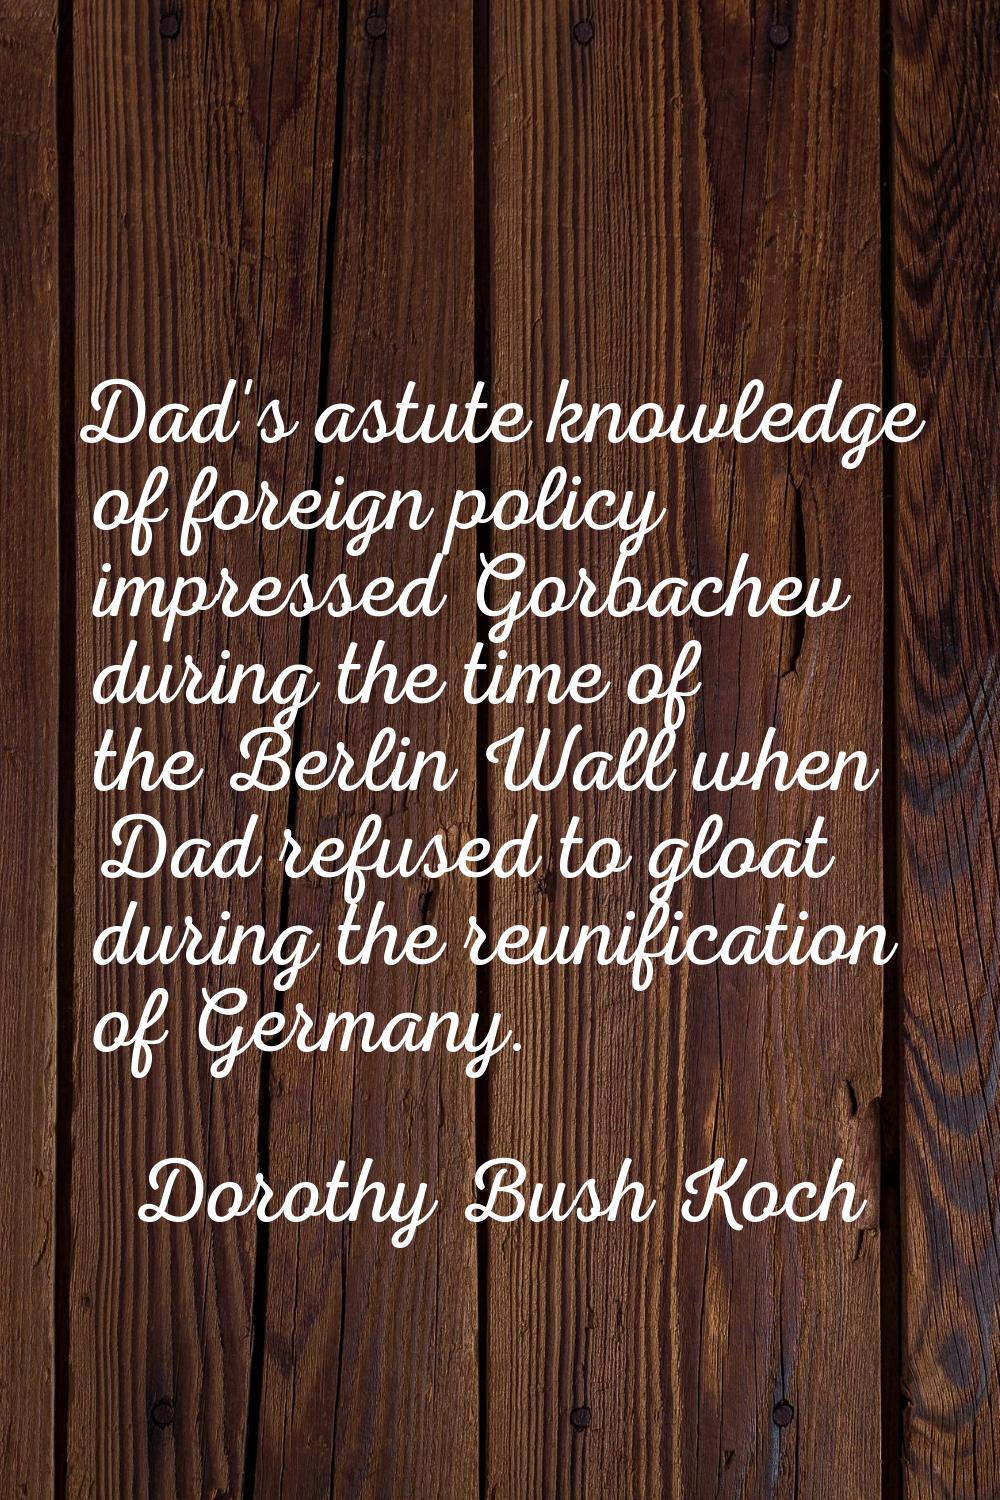 Dad's astute knowledge of foreign policy impressed Gorbachev during the time of the Berlin Wall whe